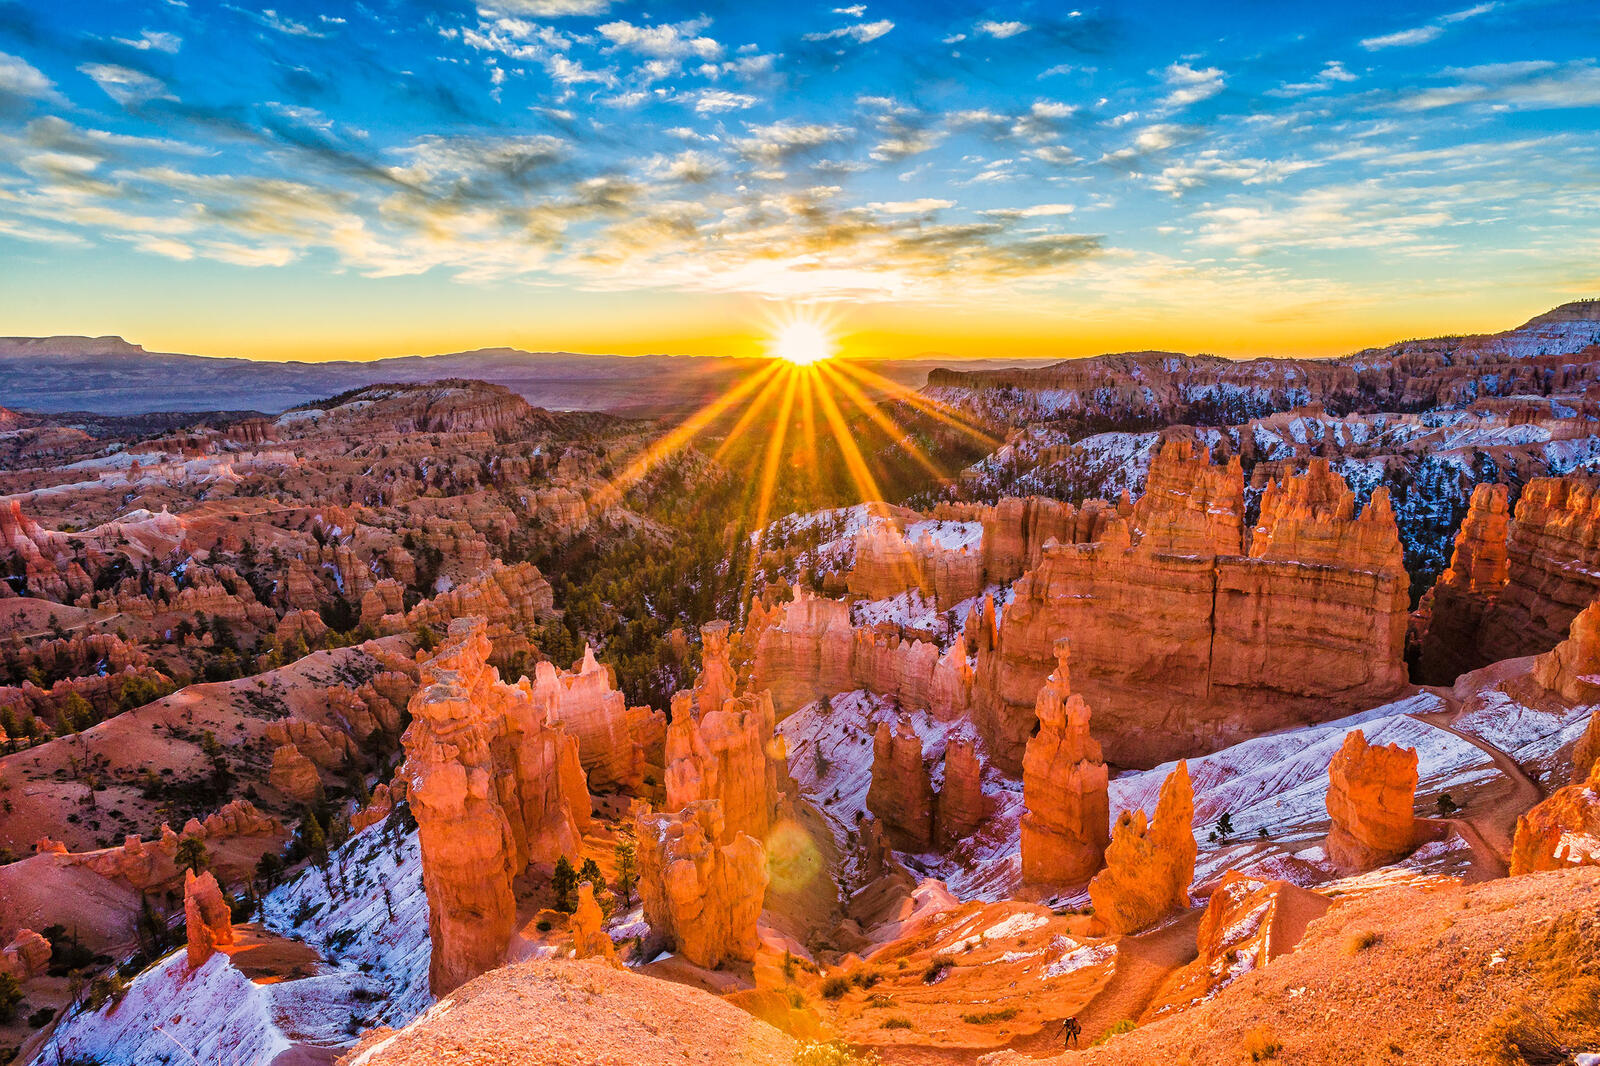 Wallpapers sky Bryce Canyon nature on the desktop